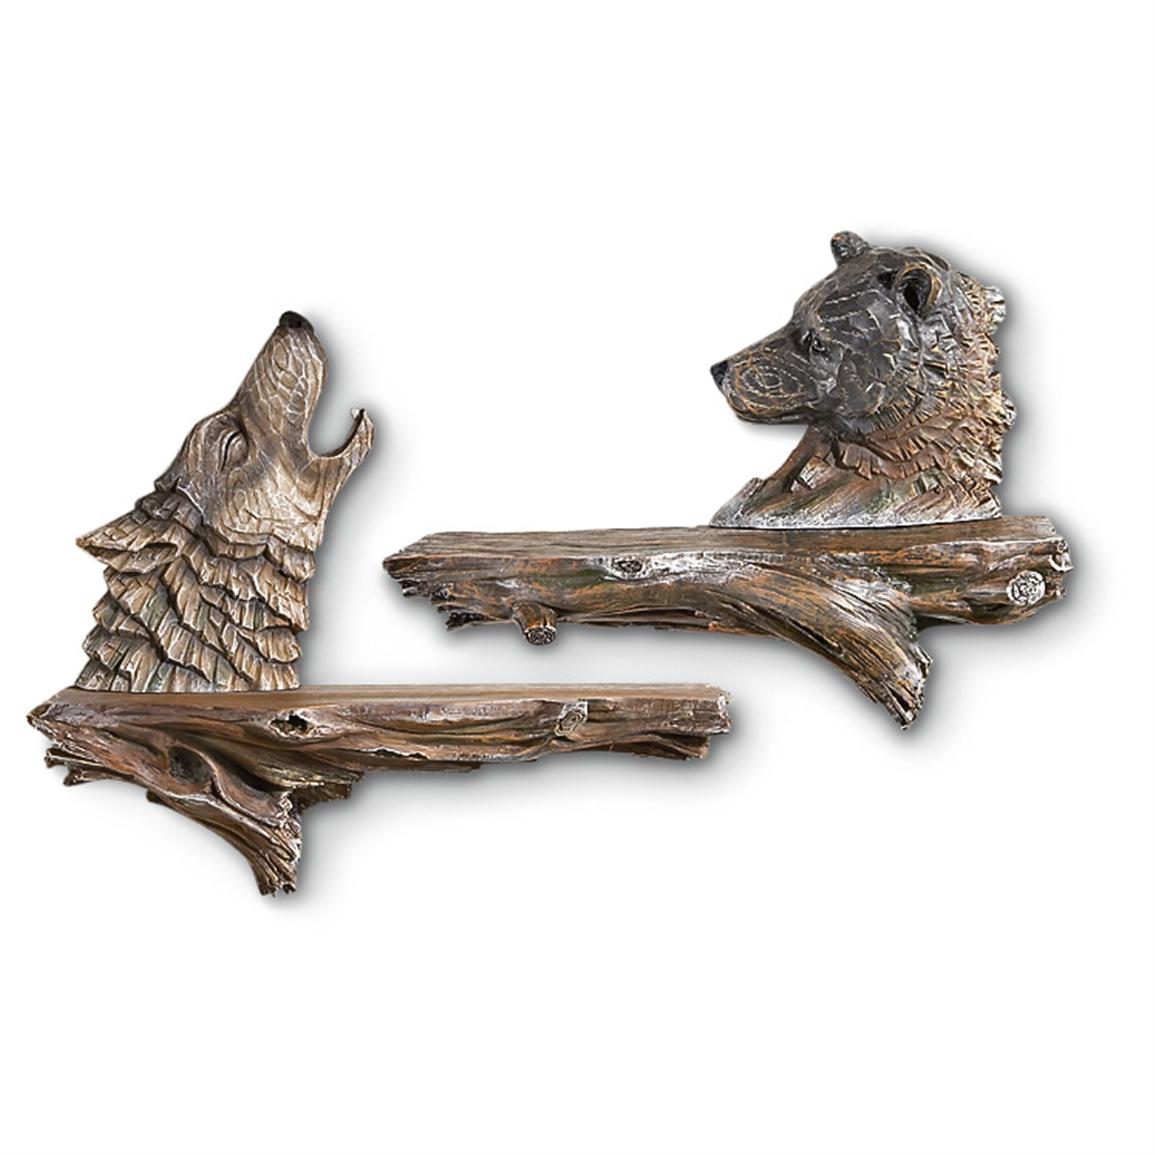 wildlife-wall-shelf-167501-decorative-accessories-at-sportsman-s-guide